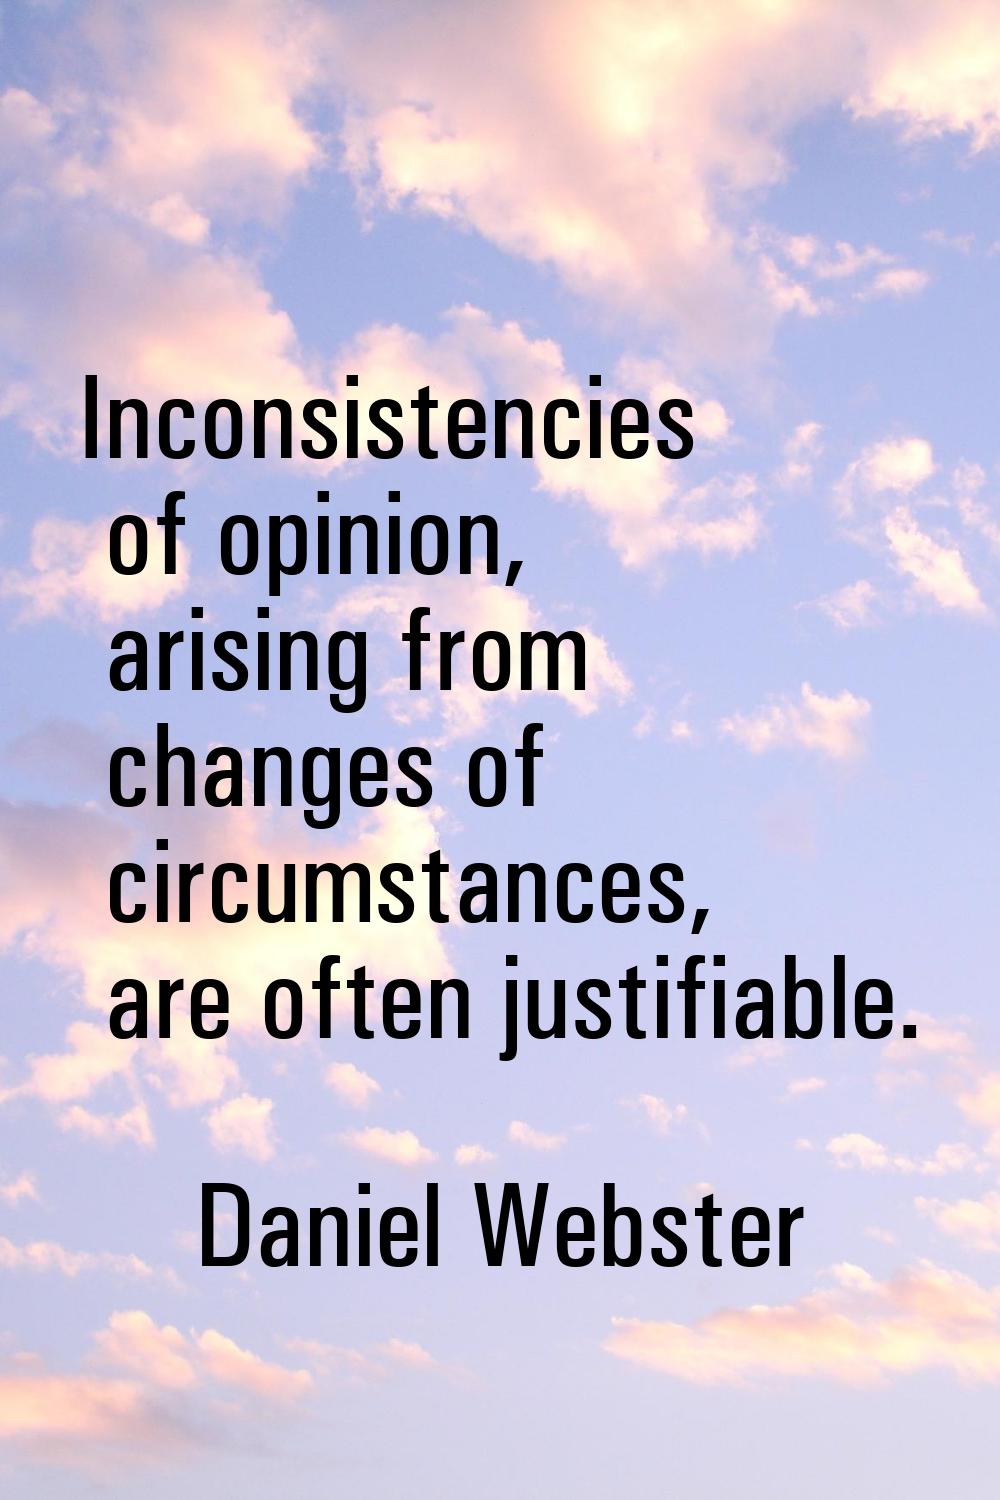 Inconsistencies of opinion, arising from changes of circumstances, are often justifiable.